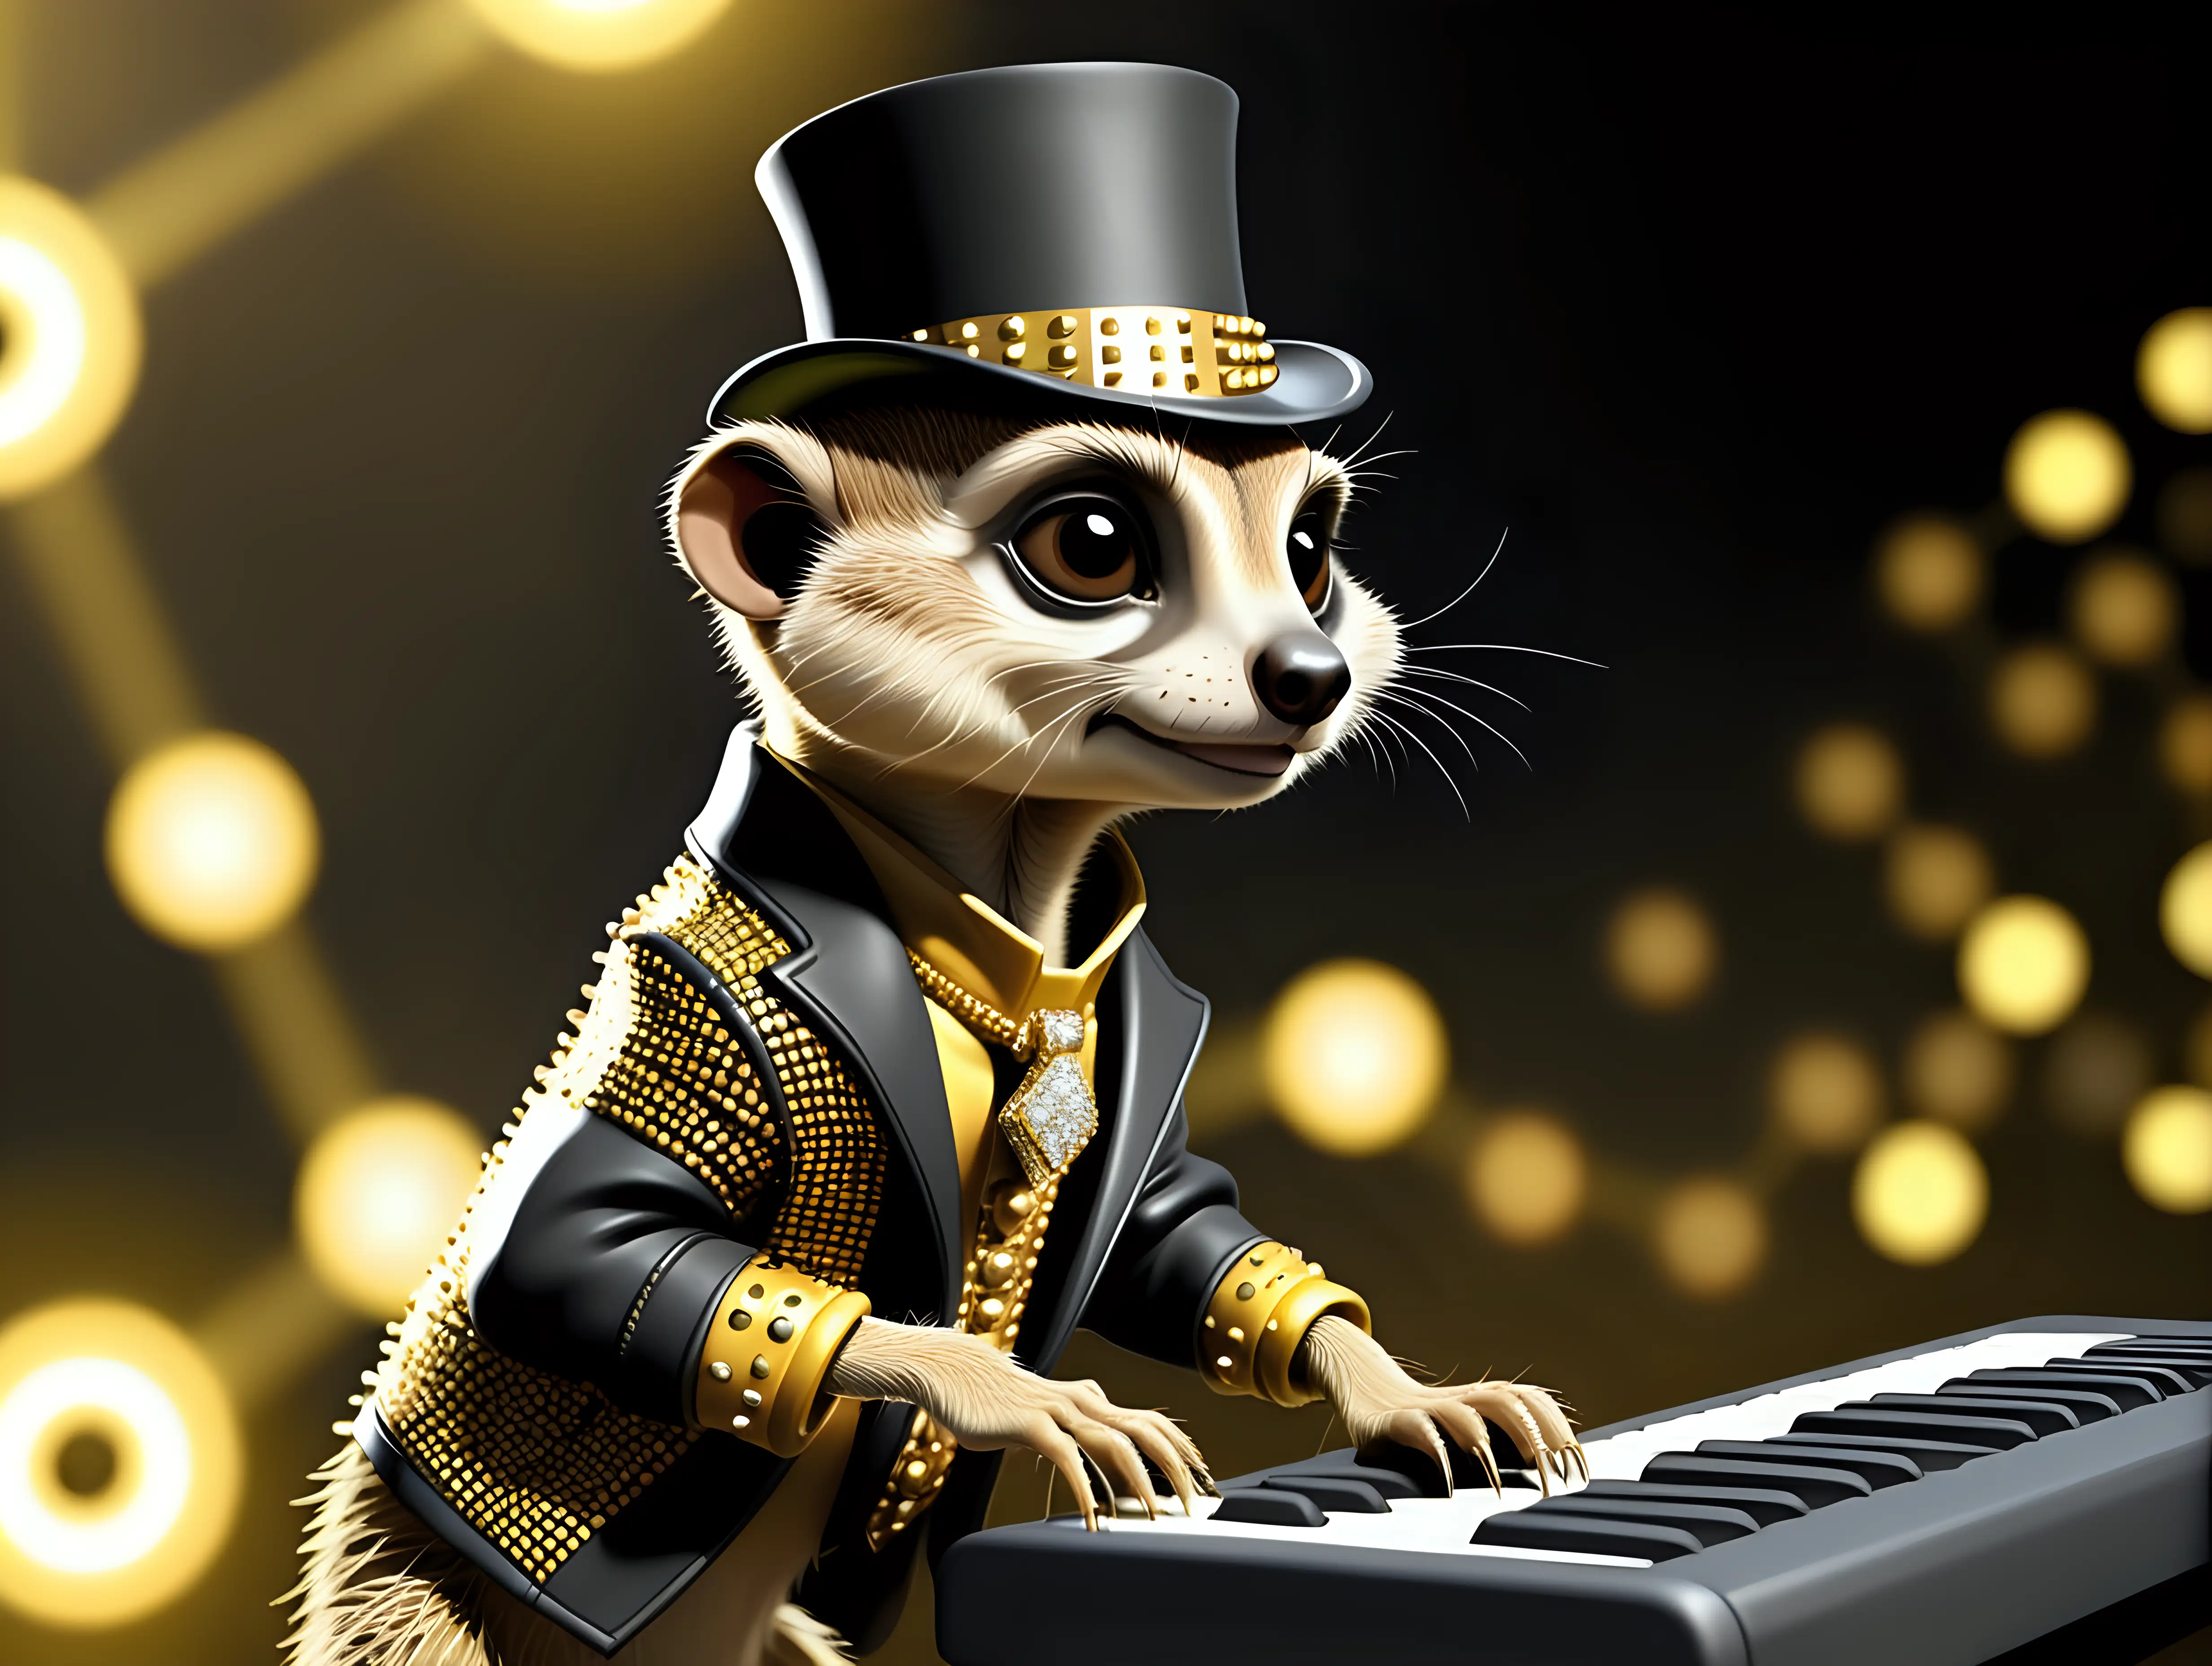 A male meercat dressed glam with a gold top hat, gold jewelery and a long black and gold studded jacket playing a black keyboard. Make the background a stage with lights. Camera angle full body view 